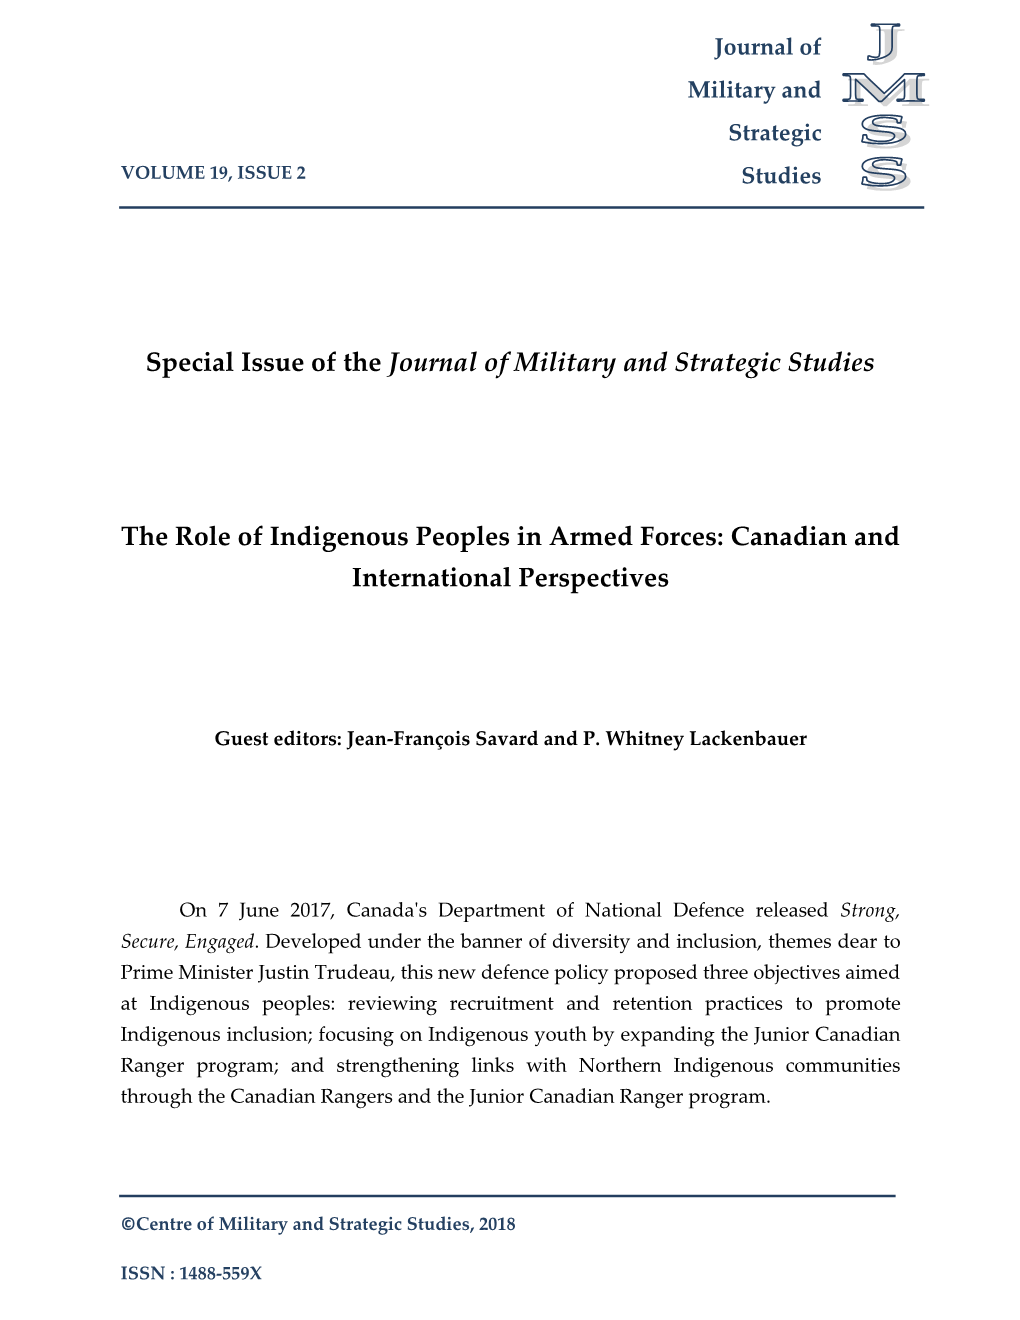 Special Issue of the Journal of Military and Strategic Studies the Role Of